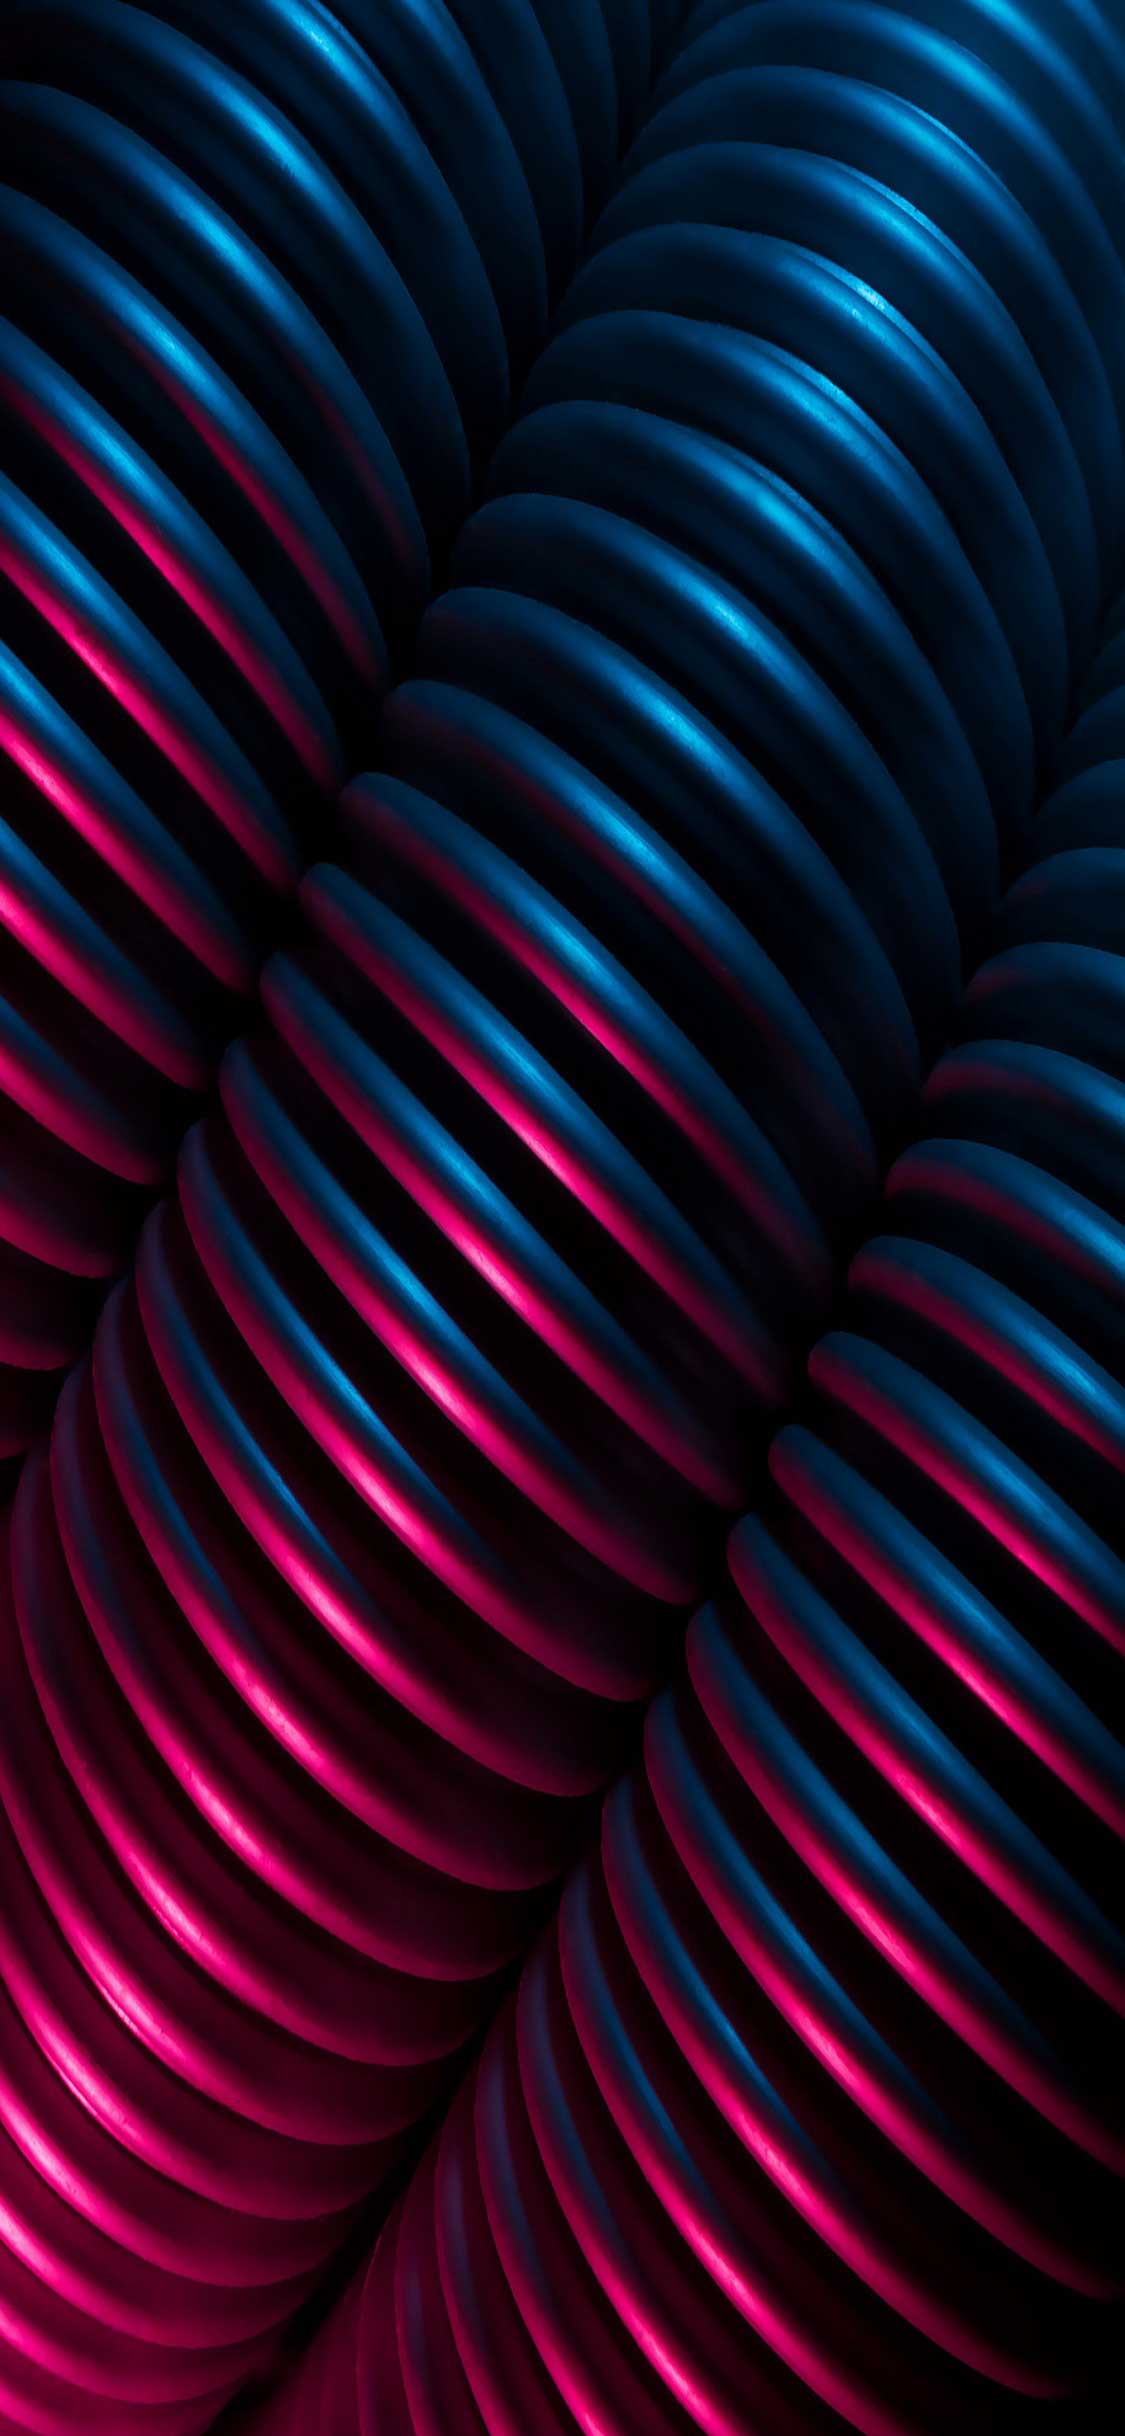 Cool Wallpaper for iPhone X